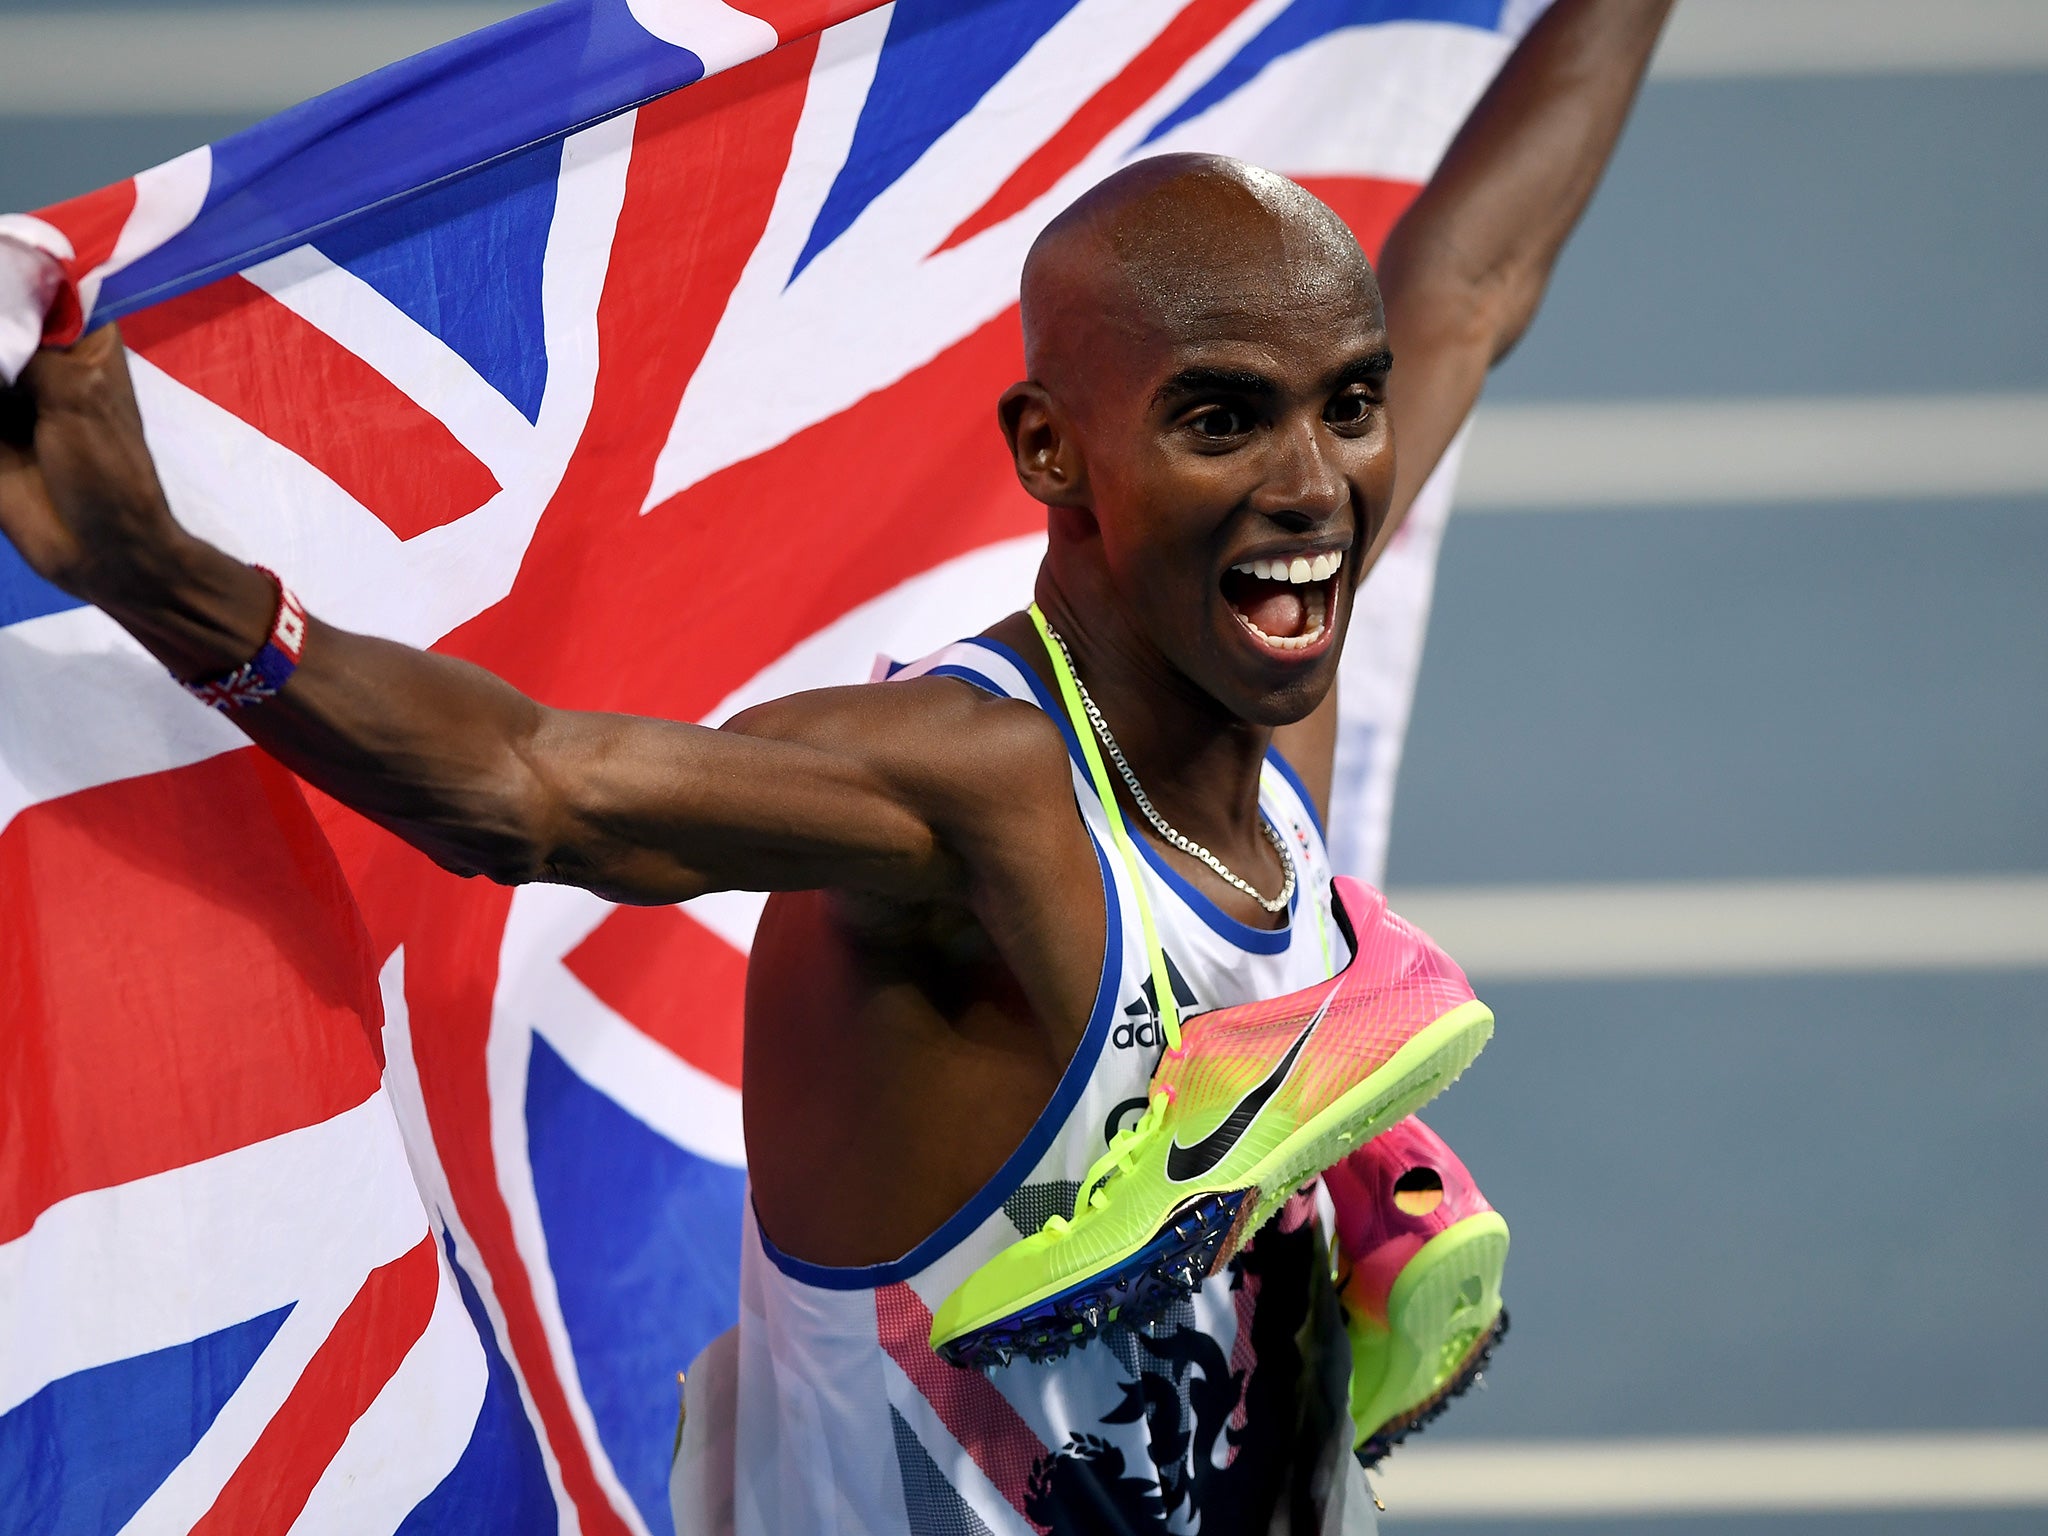 Farah celebrates with a Union Jack after his 5,000 metre win last year